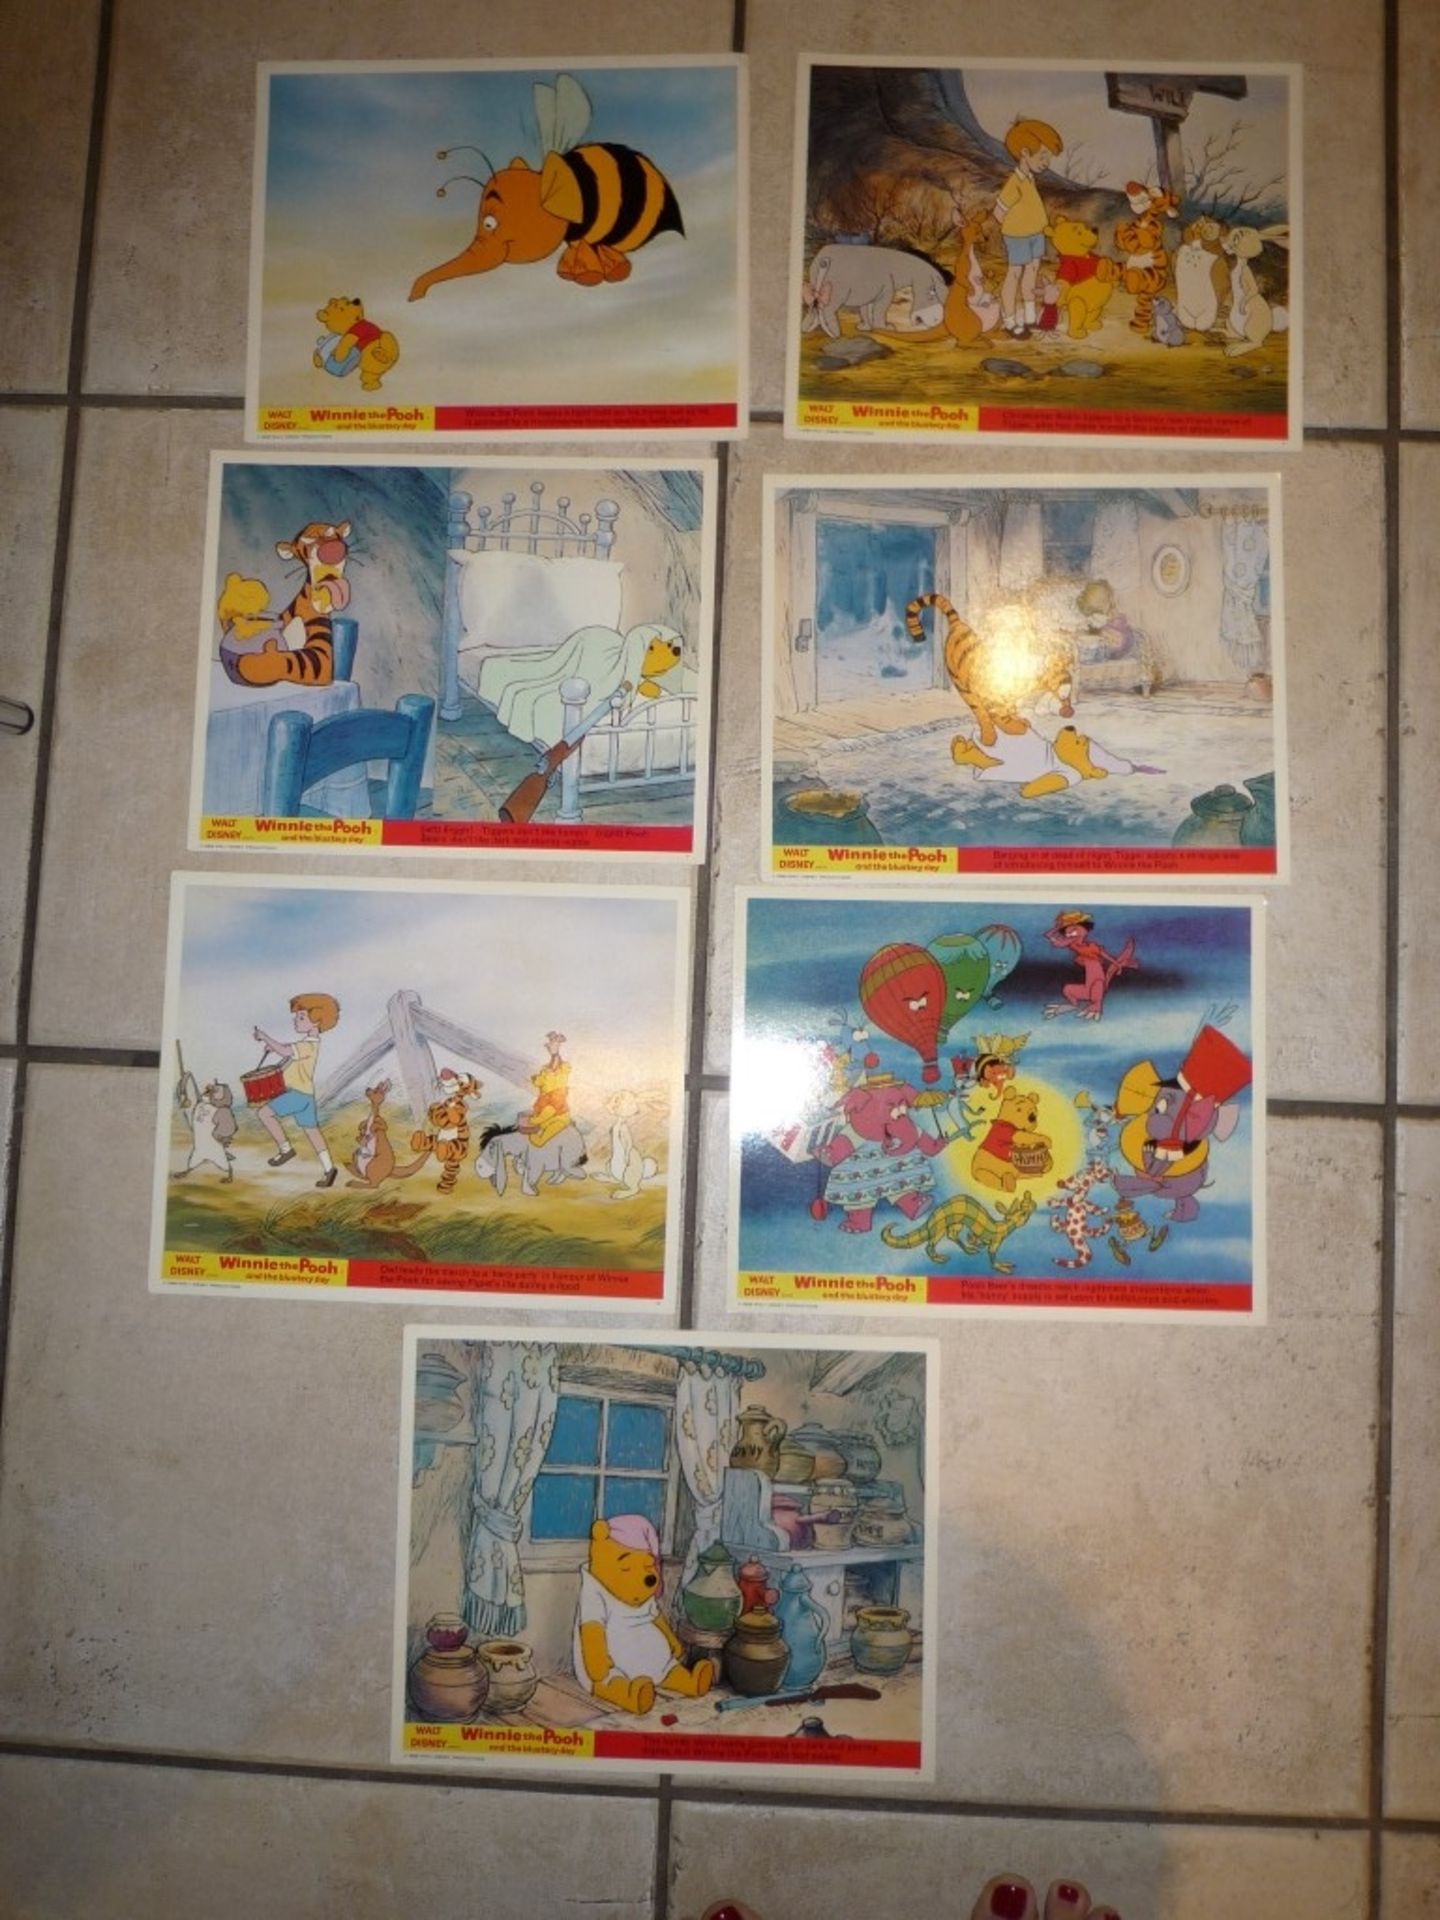 Winnie the Pooh and the Blustery Day lobby cards - Image 2 of 2